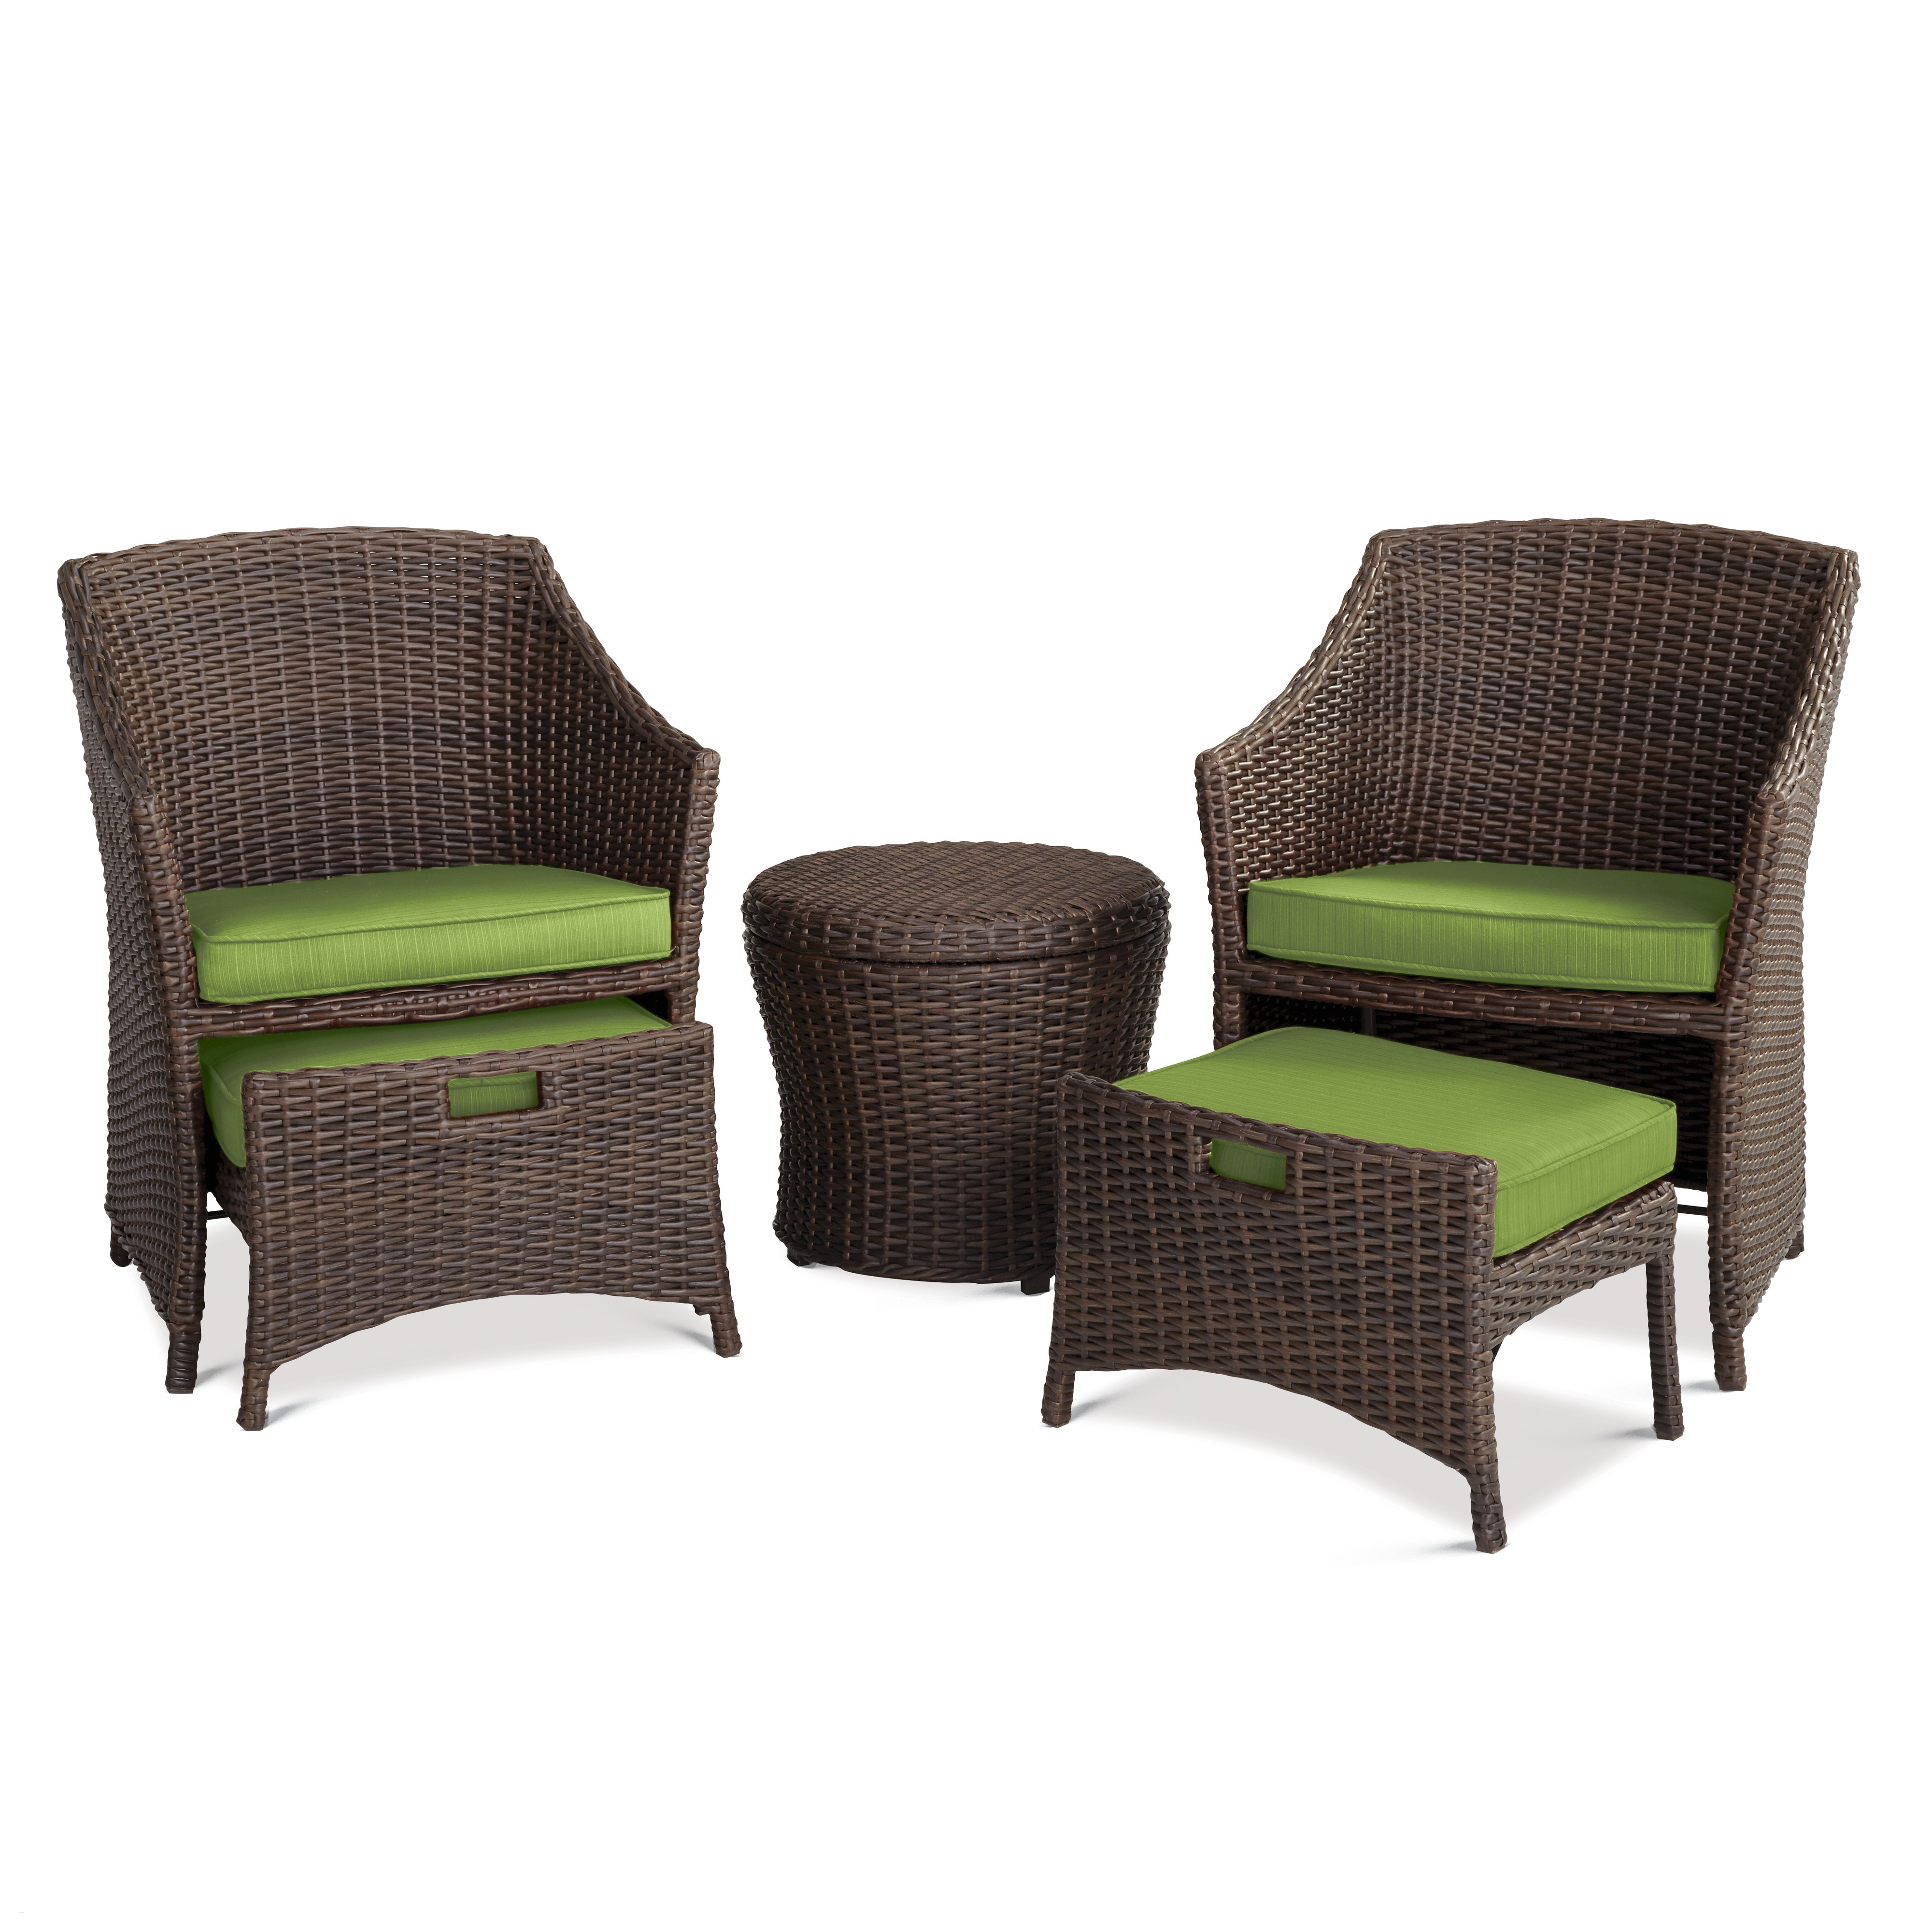 Folding Lawn Chairs at Lowes Beautiful Lowes Patio Furniture On Sale 2016 Search Property Ph